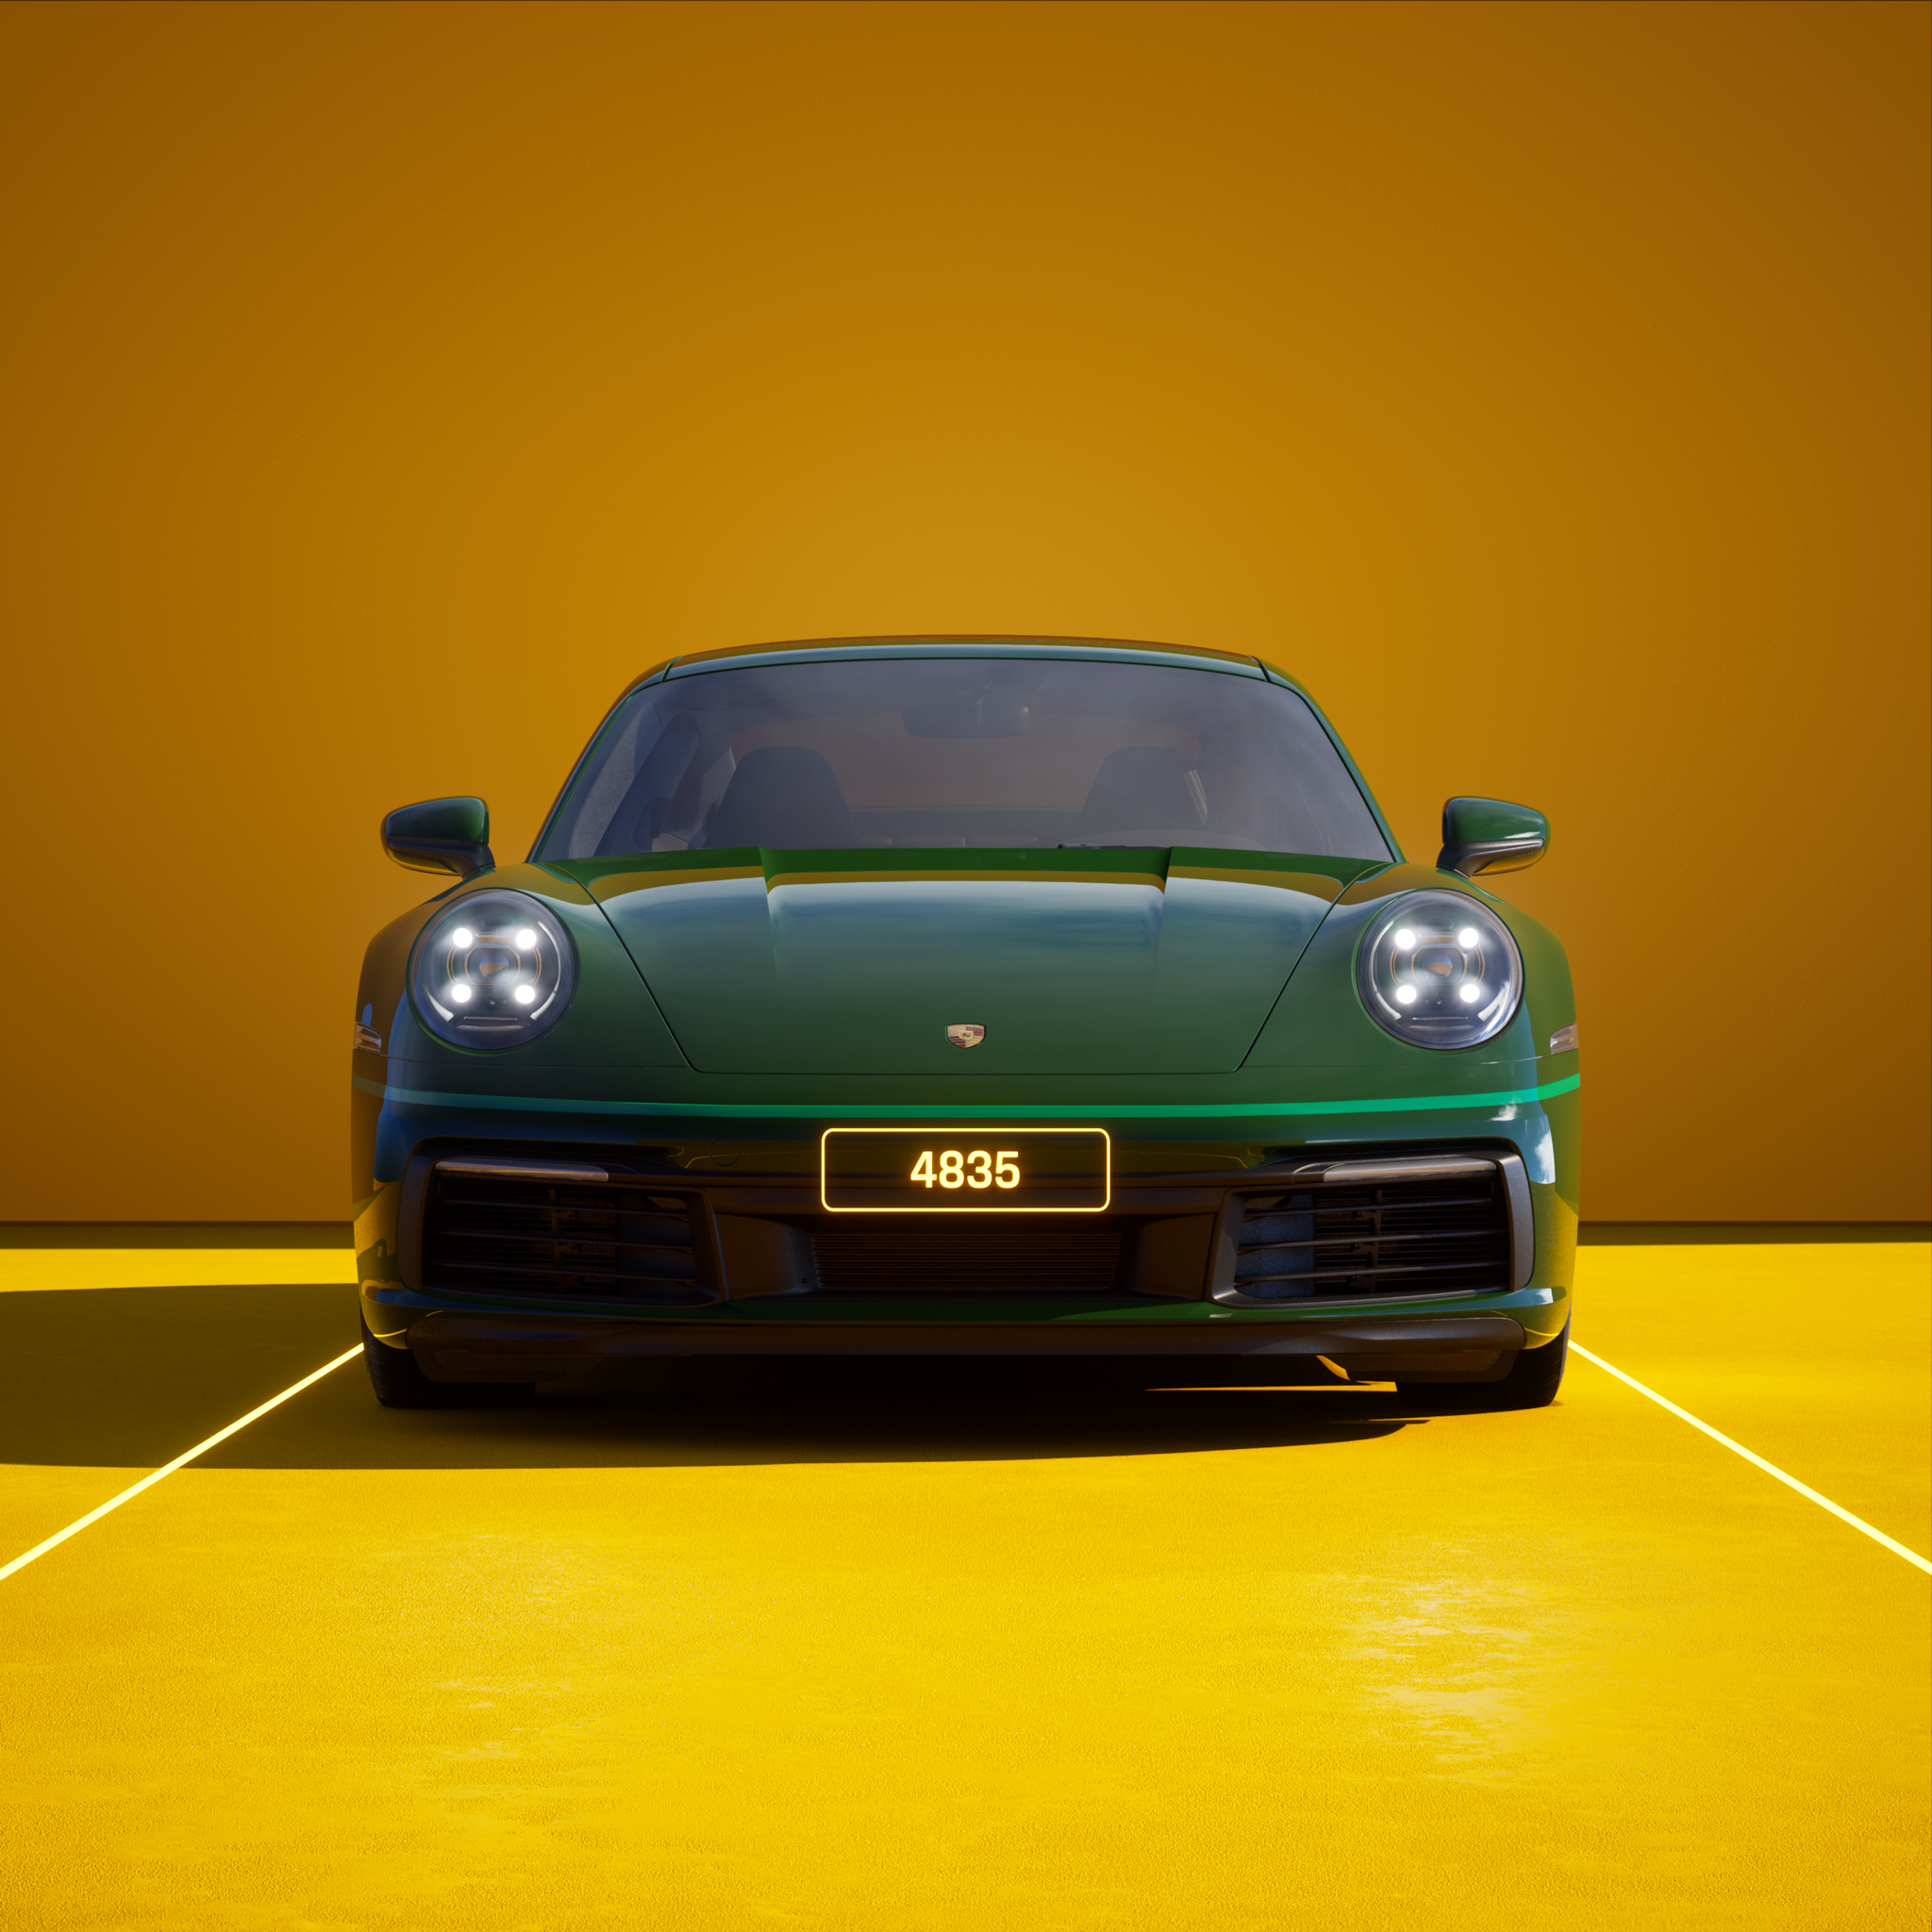 The PORSCHΞ 911 4835 image in phase